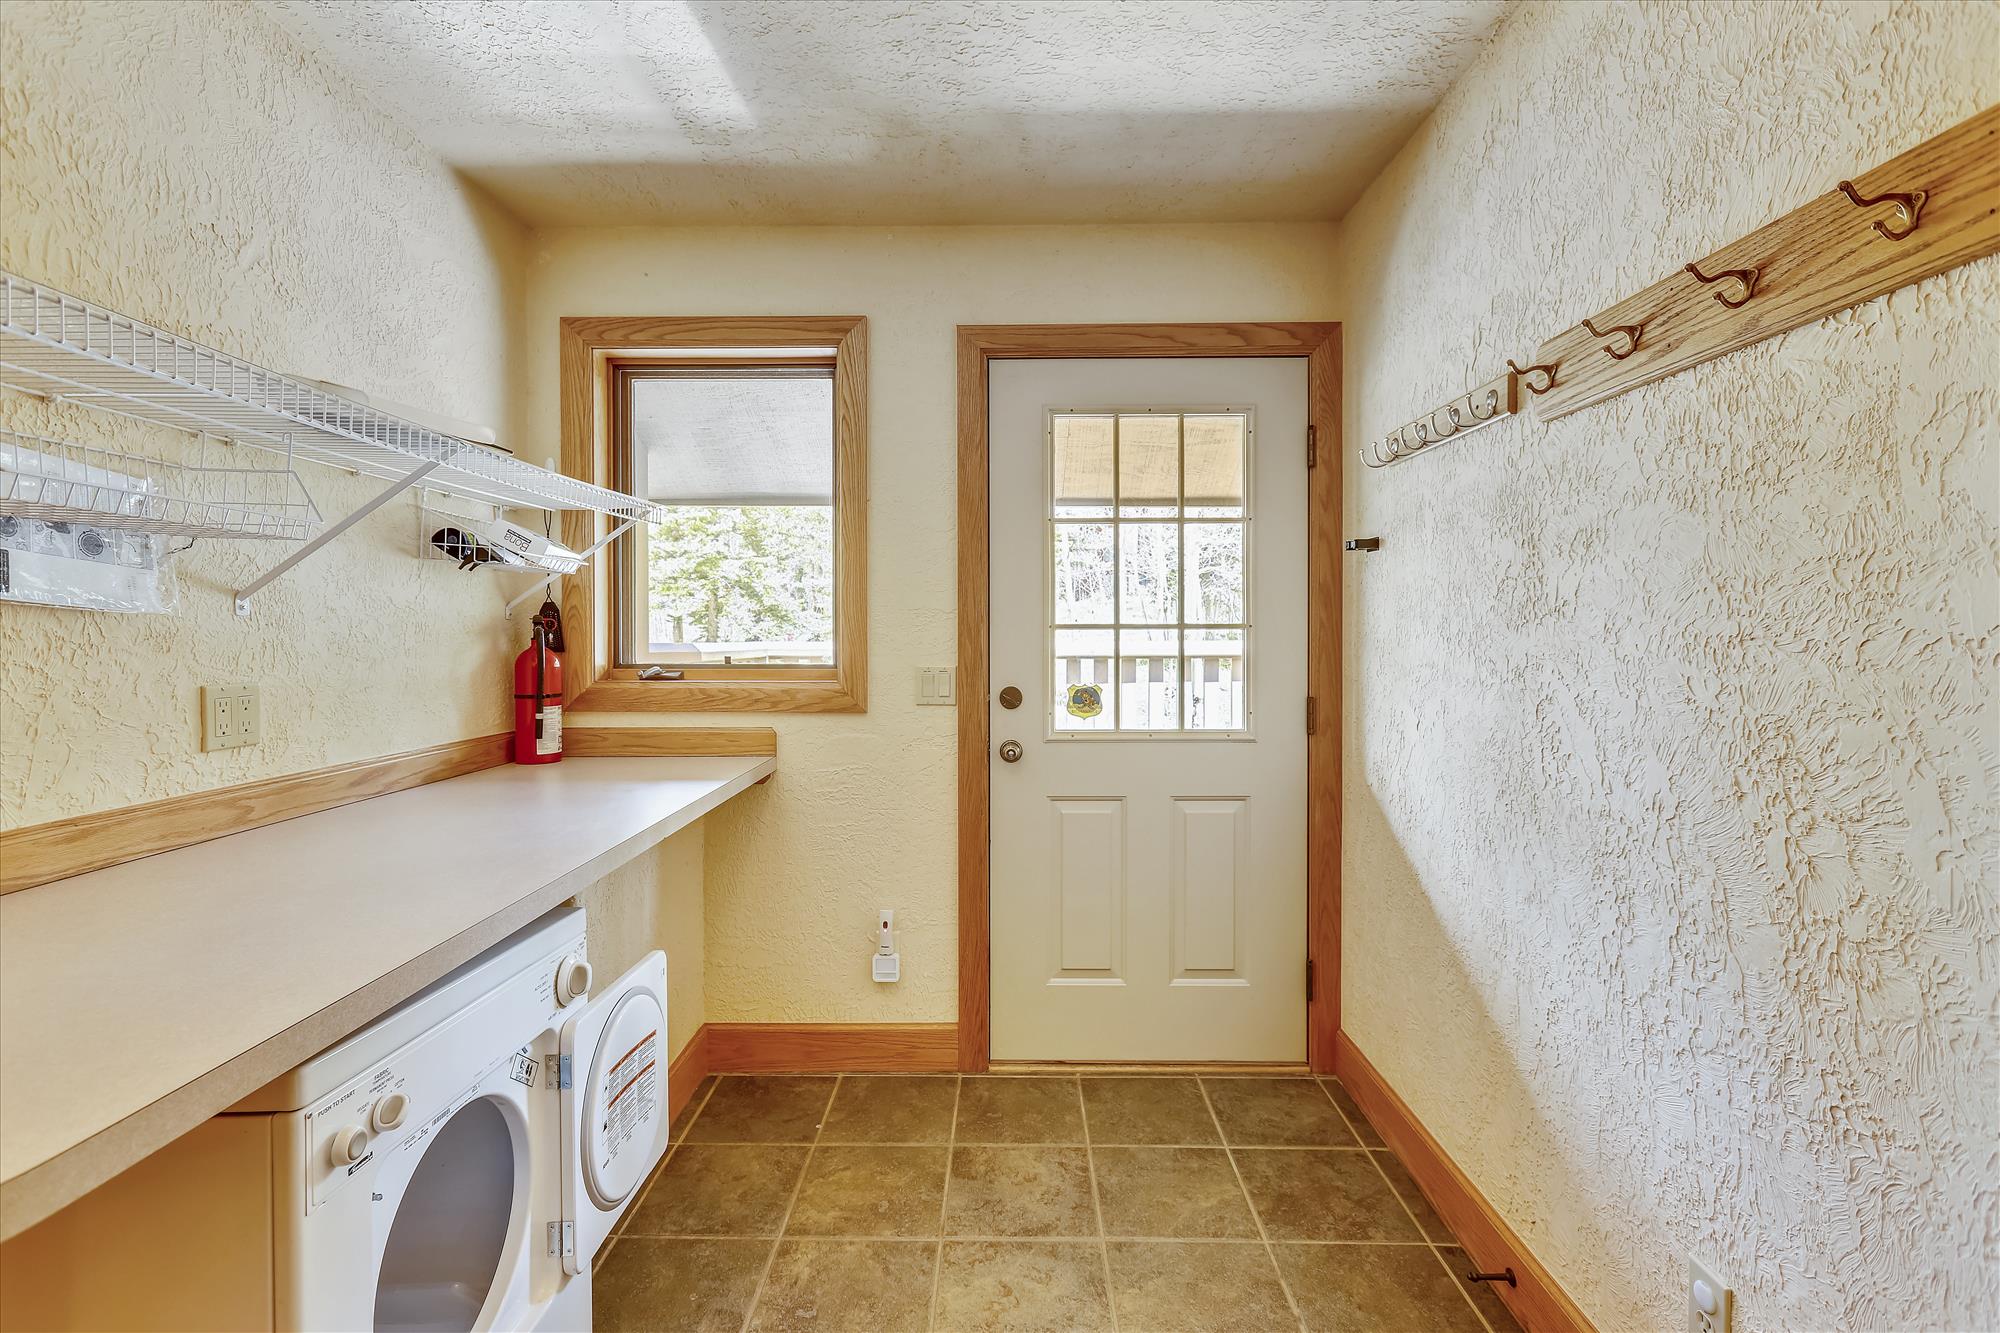 This Mudroom / laundry room offers plenty of space to store ski gear and any other storage needs - Evergreen Lodge Breckenridge Vacation Rental